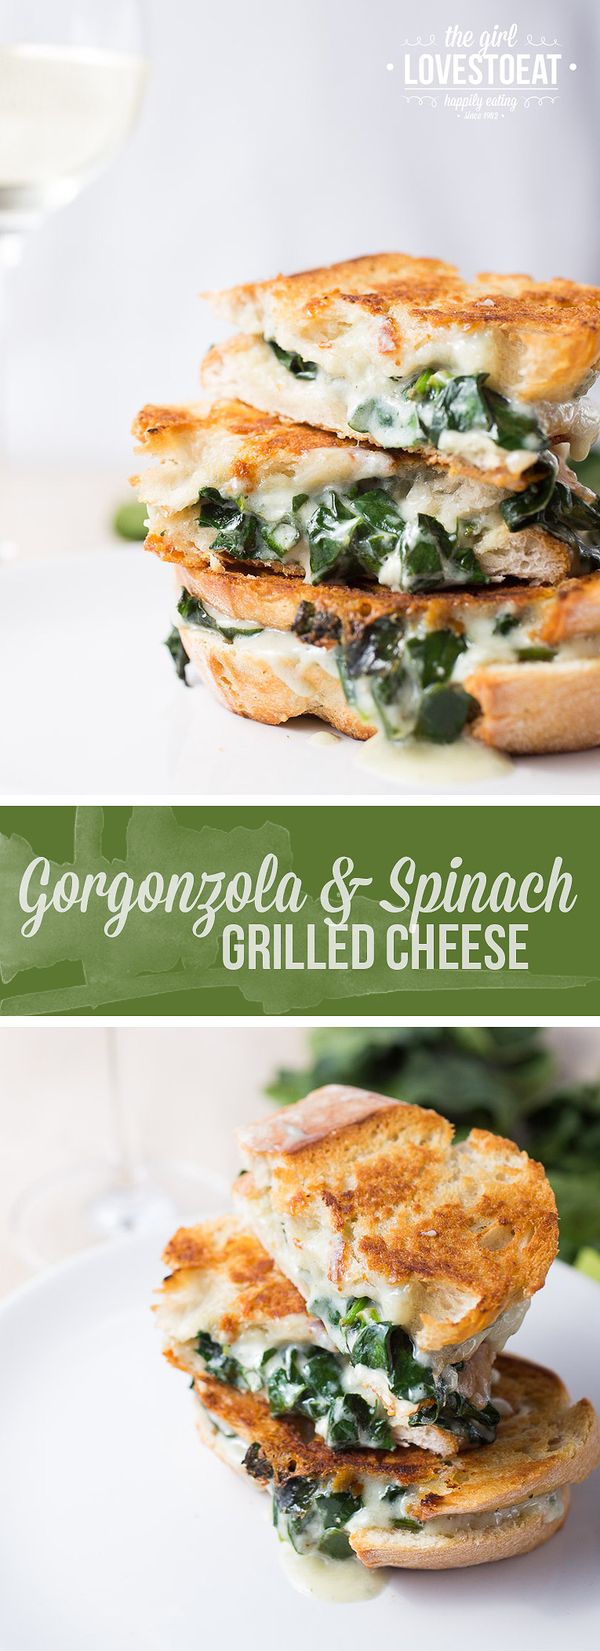 Gorgonzola with spinach grilled cheese